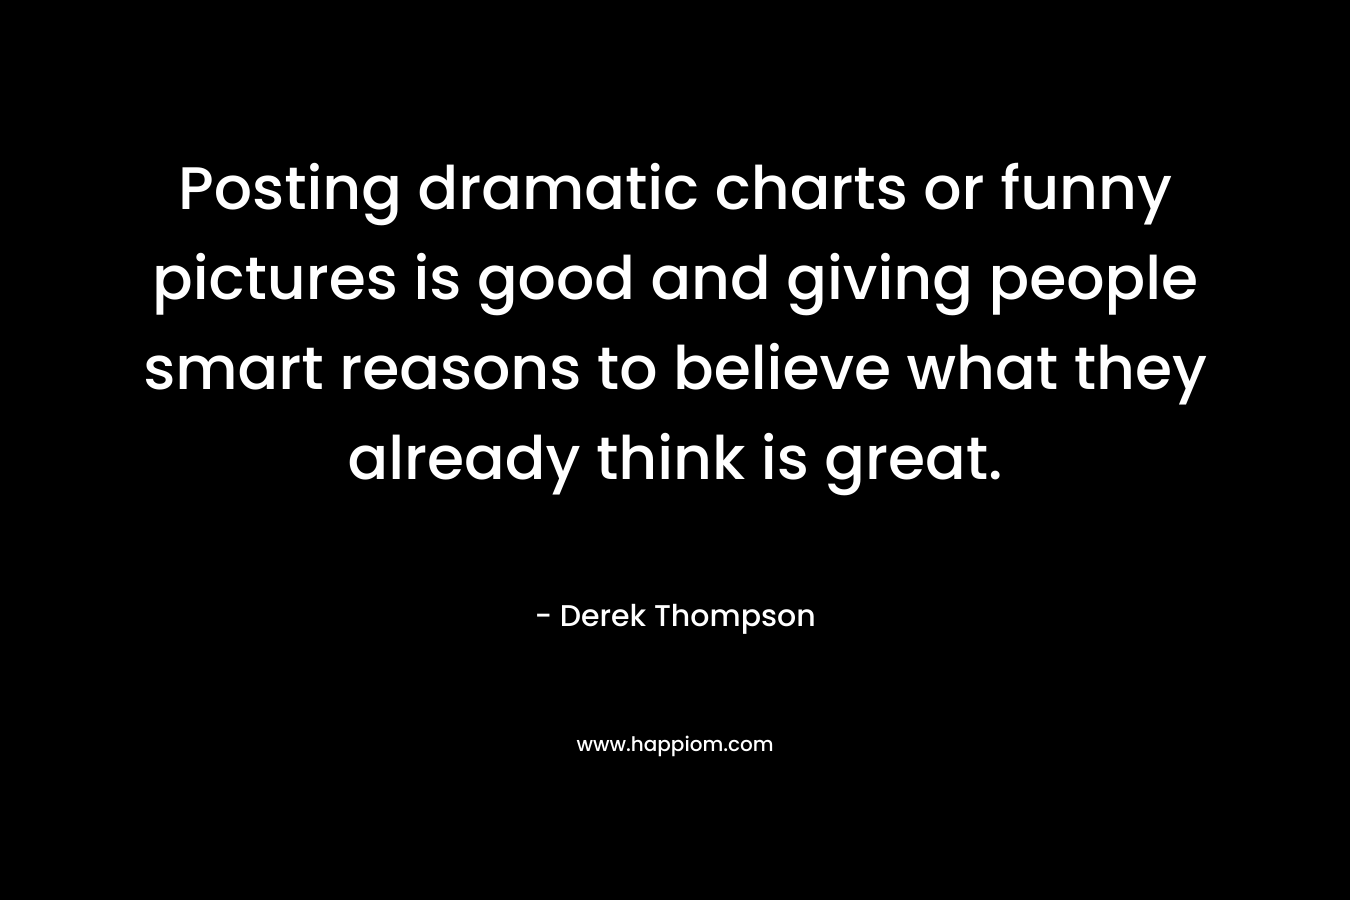 Posting dramatic charts or funny pictures is good and giving people smart reasons to believe what they already think is great.